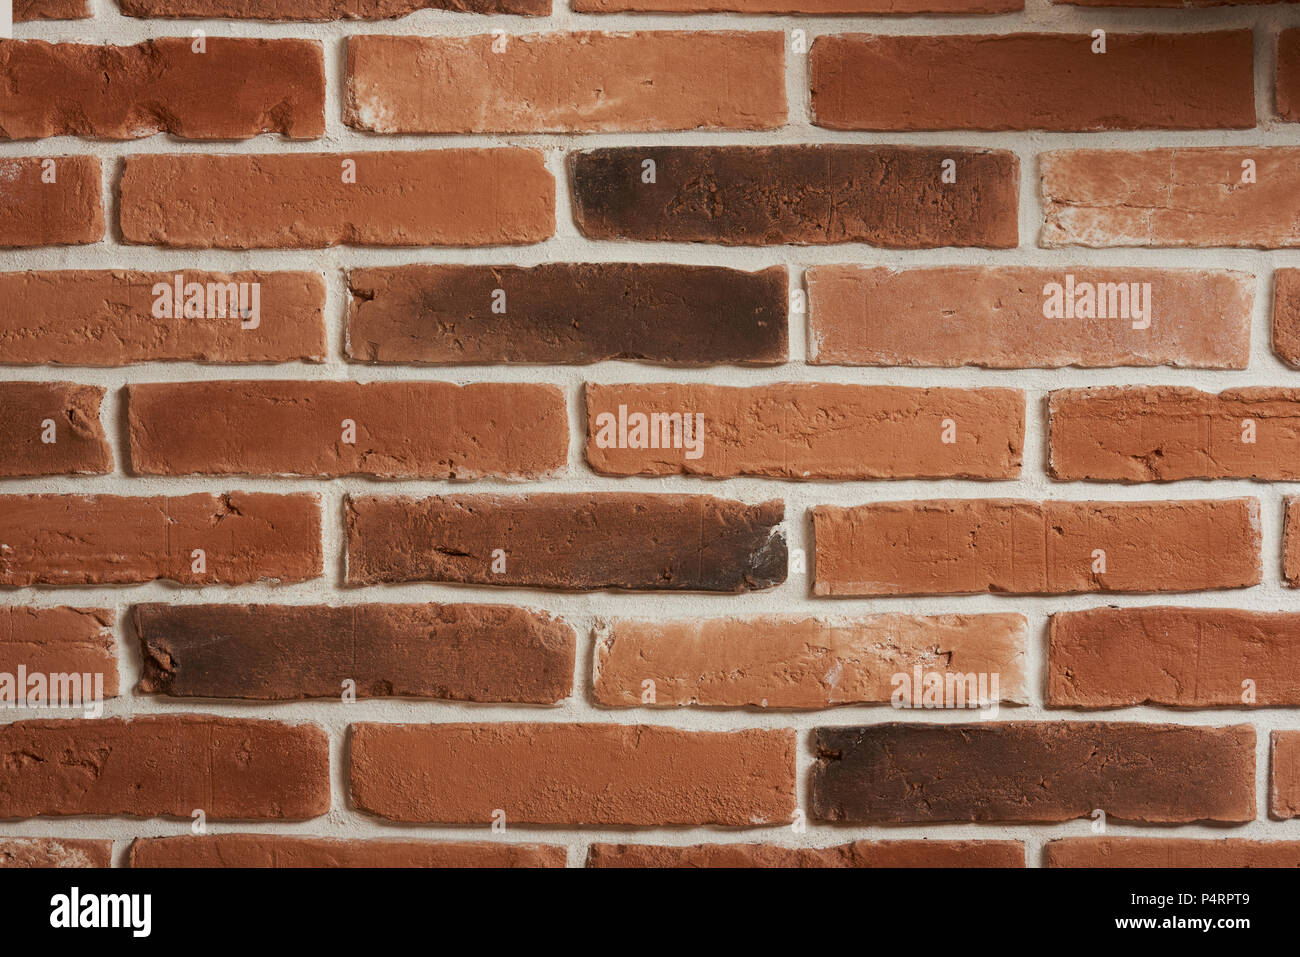 Texture of red brick wall. Clean brick pattern with white concrete lines Stock Photo